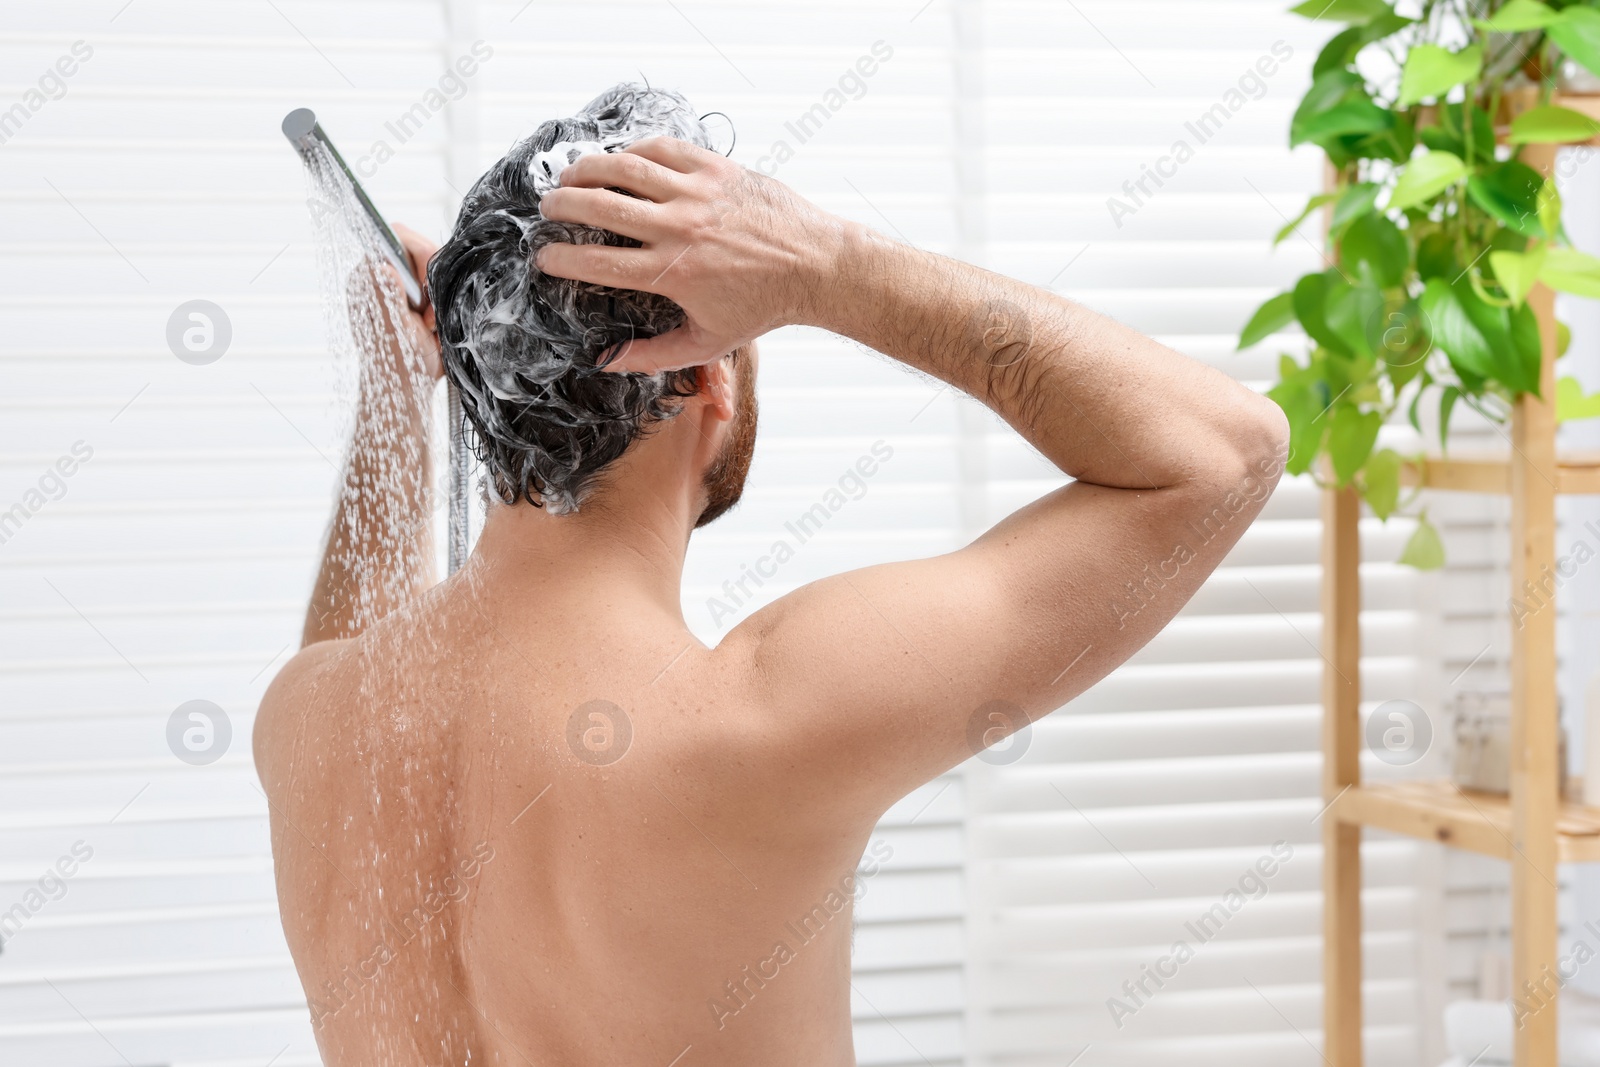 Photo of Man washing his hair with shampoo in bathroom, back view